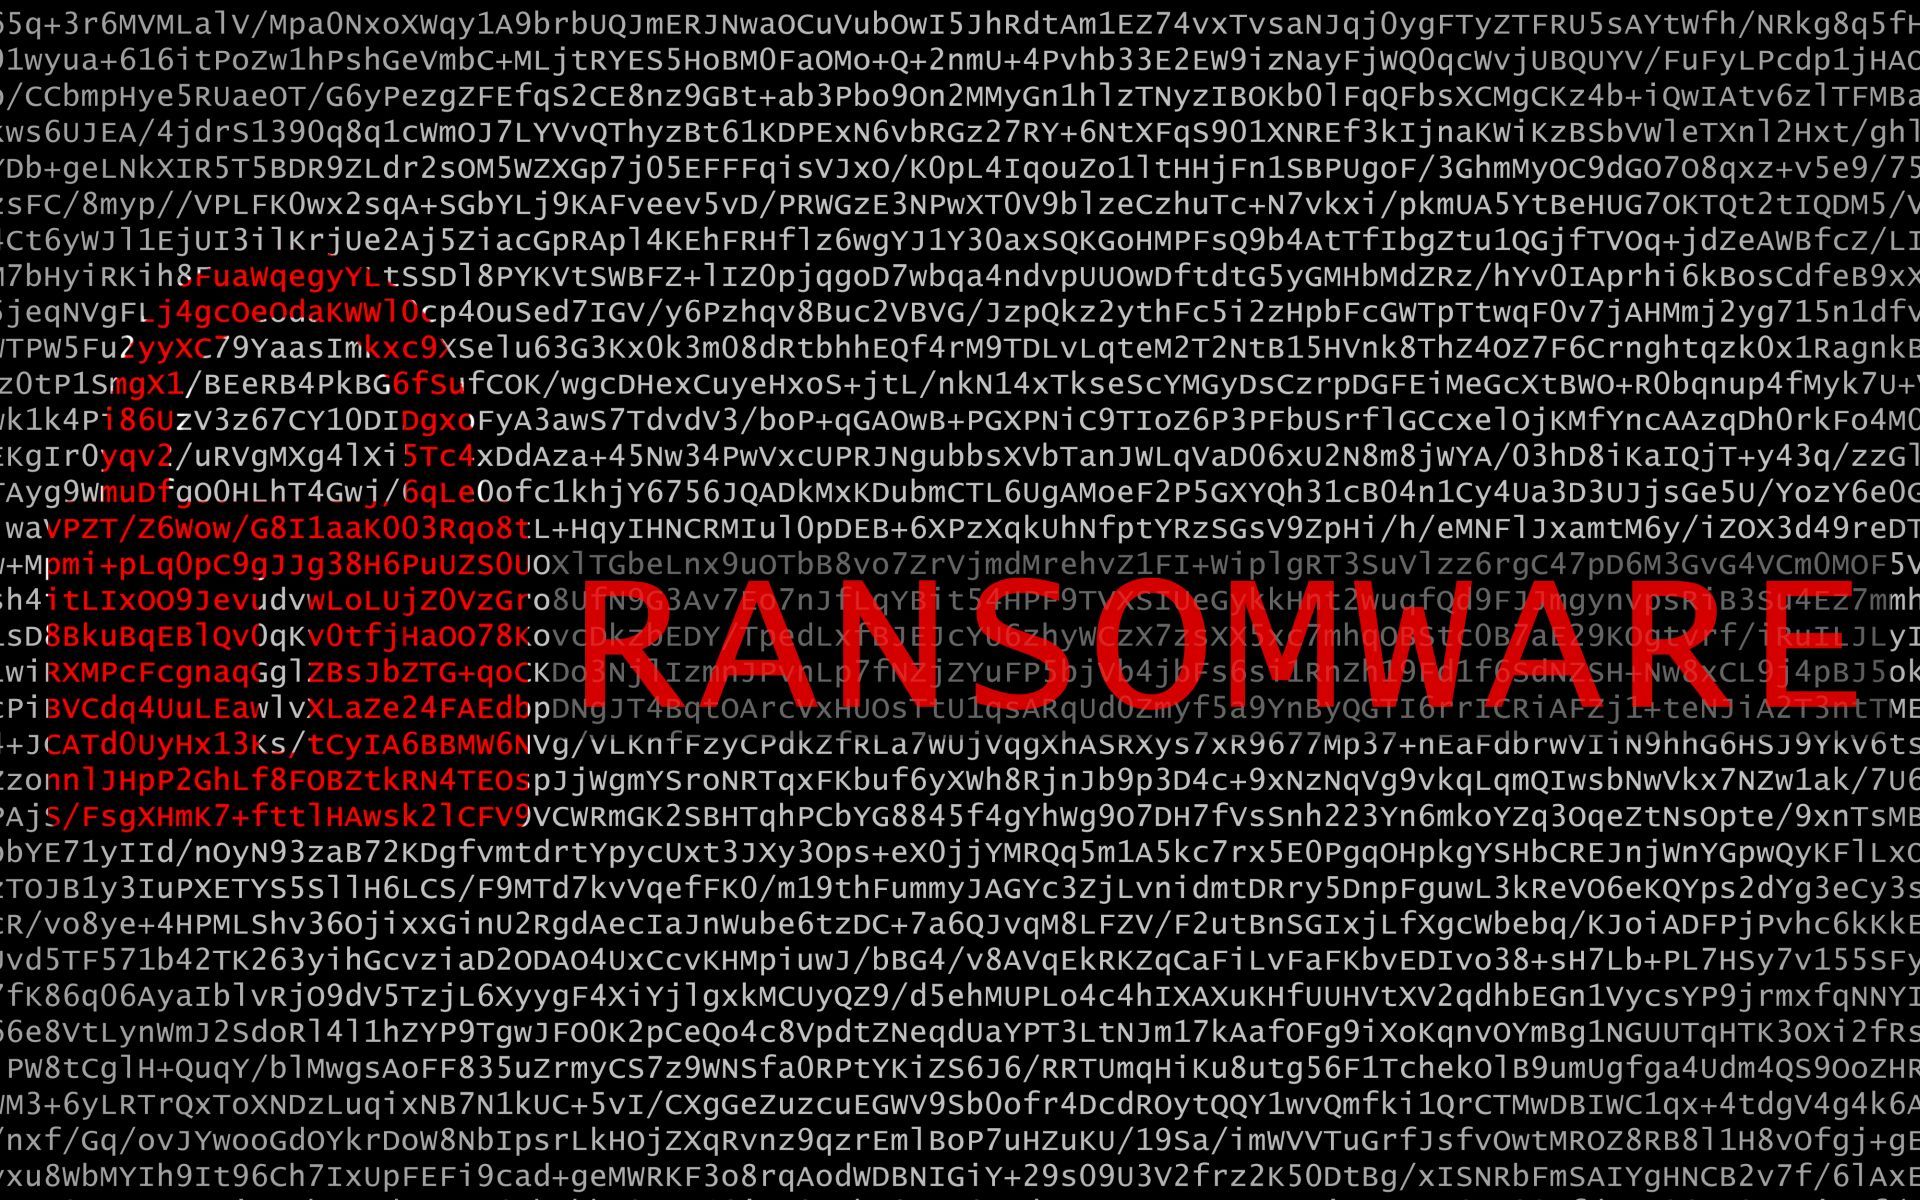 Newly Discovered Ransomware Sells Decryptor in Roblox